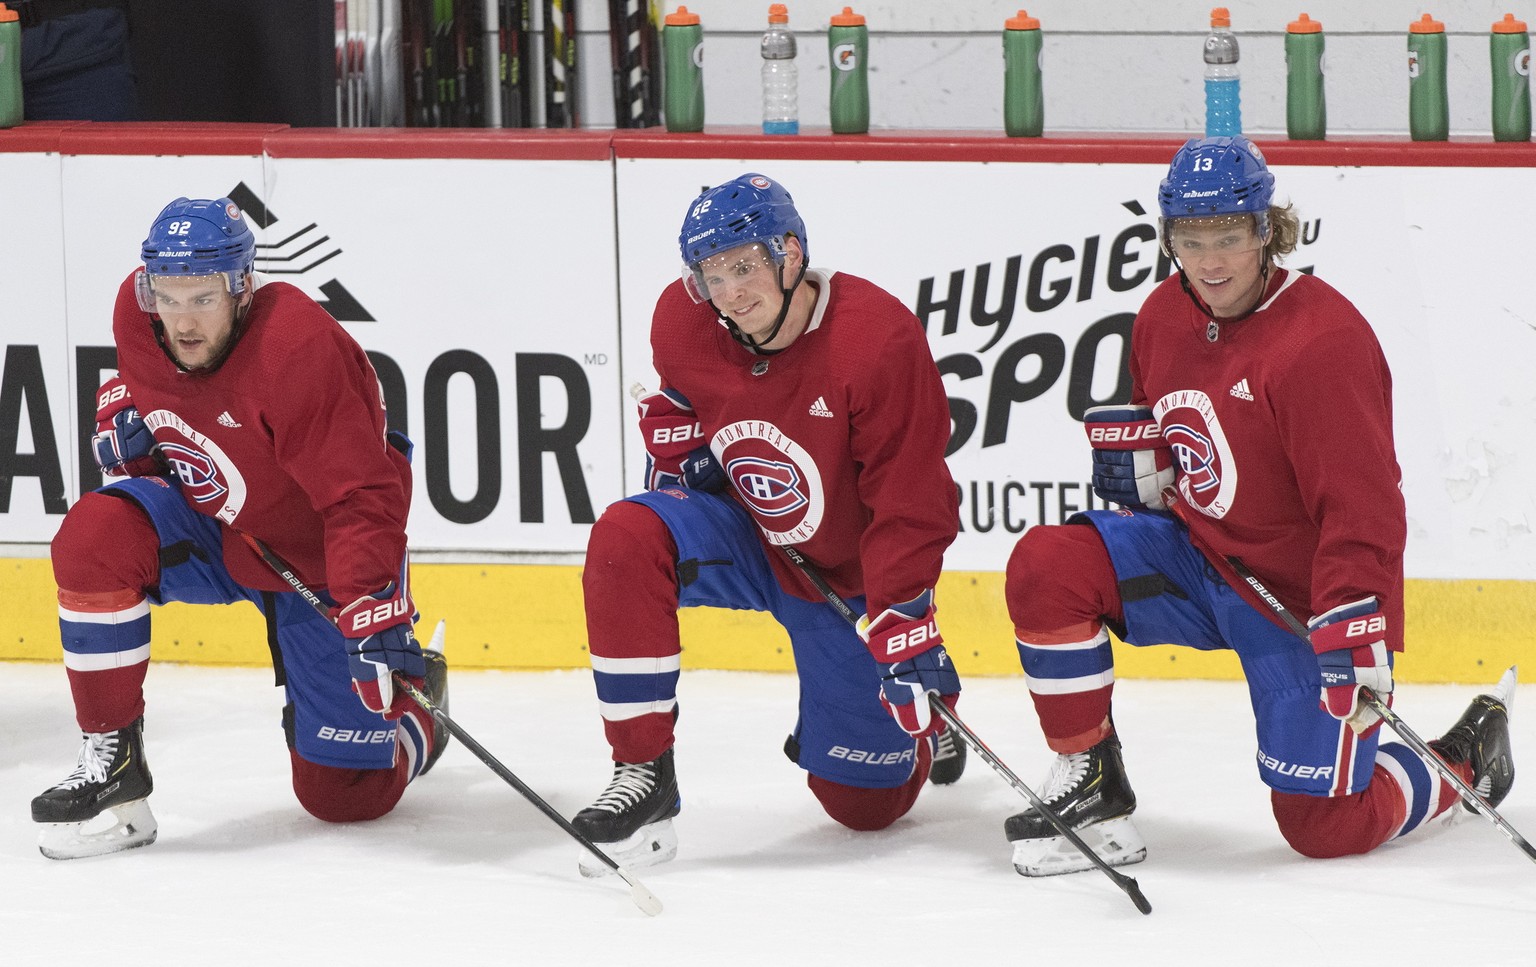 Montreal Canadiens players Jonathan Drouin (92), Artturi Lehkonen (62) and Max Domi (13) look on during NHL hockey training camp in Brossard, Quebec, Friday, Sept. 13, 2019. (Graham Hughes/The Canadia ...